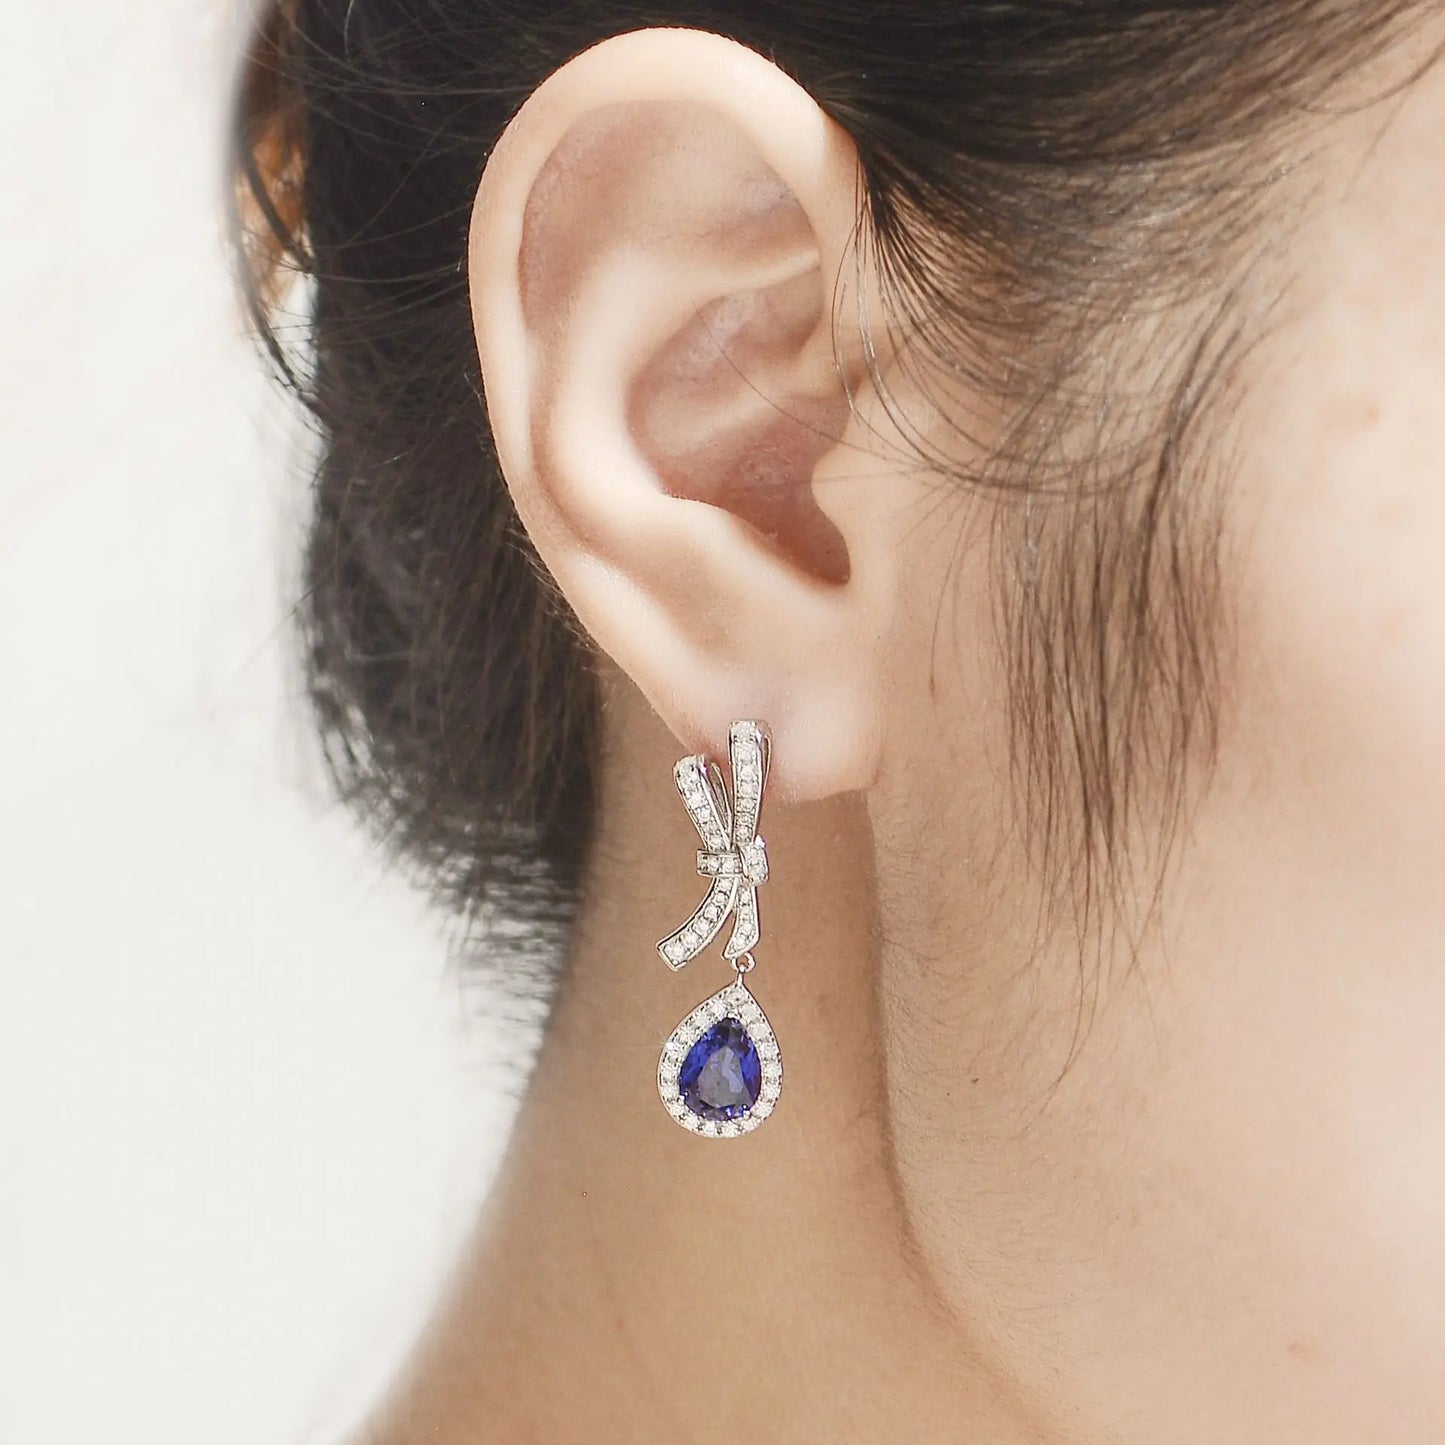 Pear Cut Blue Sapphire Dangle Earrings in Platinum-Plated 925 Sterling Silver